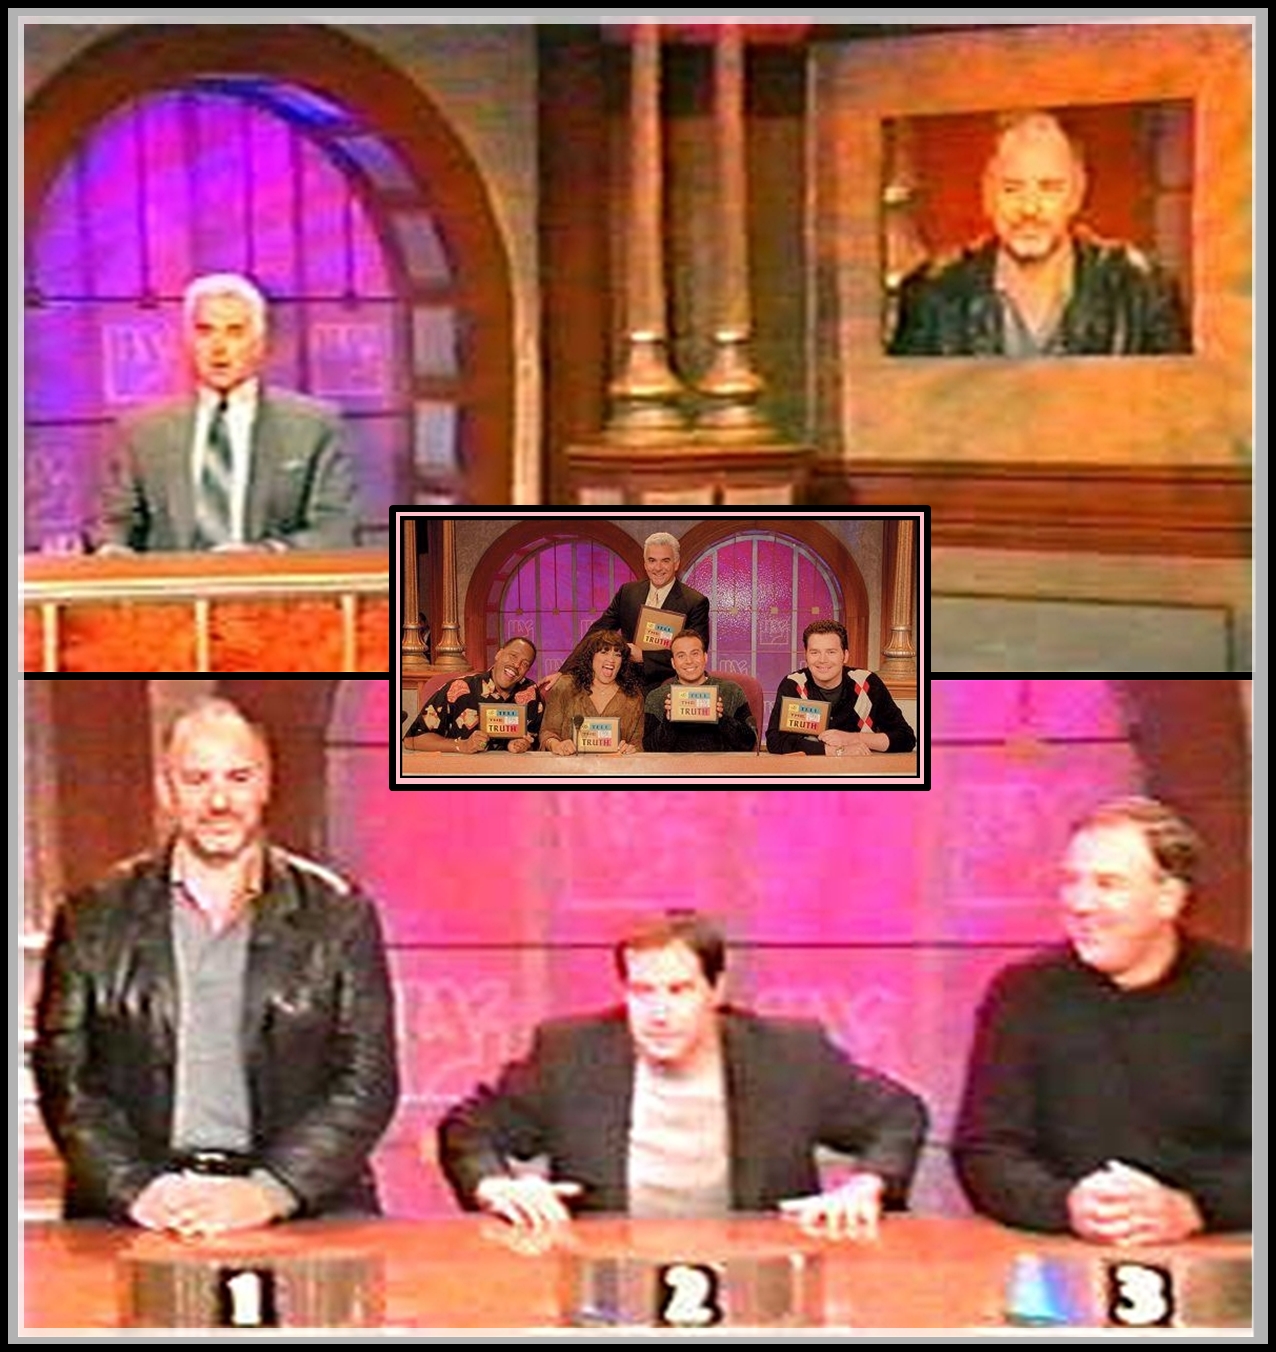 'Will the Real ISPR Parapsychologist Dr. Larry Montz, please stand up' - January 2001, TO TELL THE TRUTH on NBC, hosted by John O'Hurley.